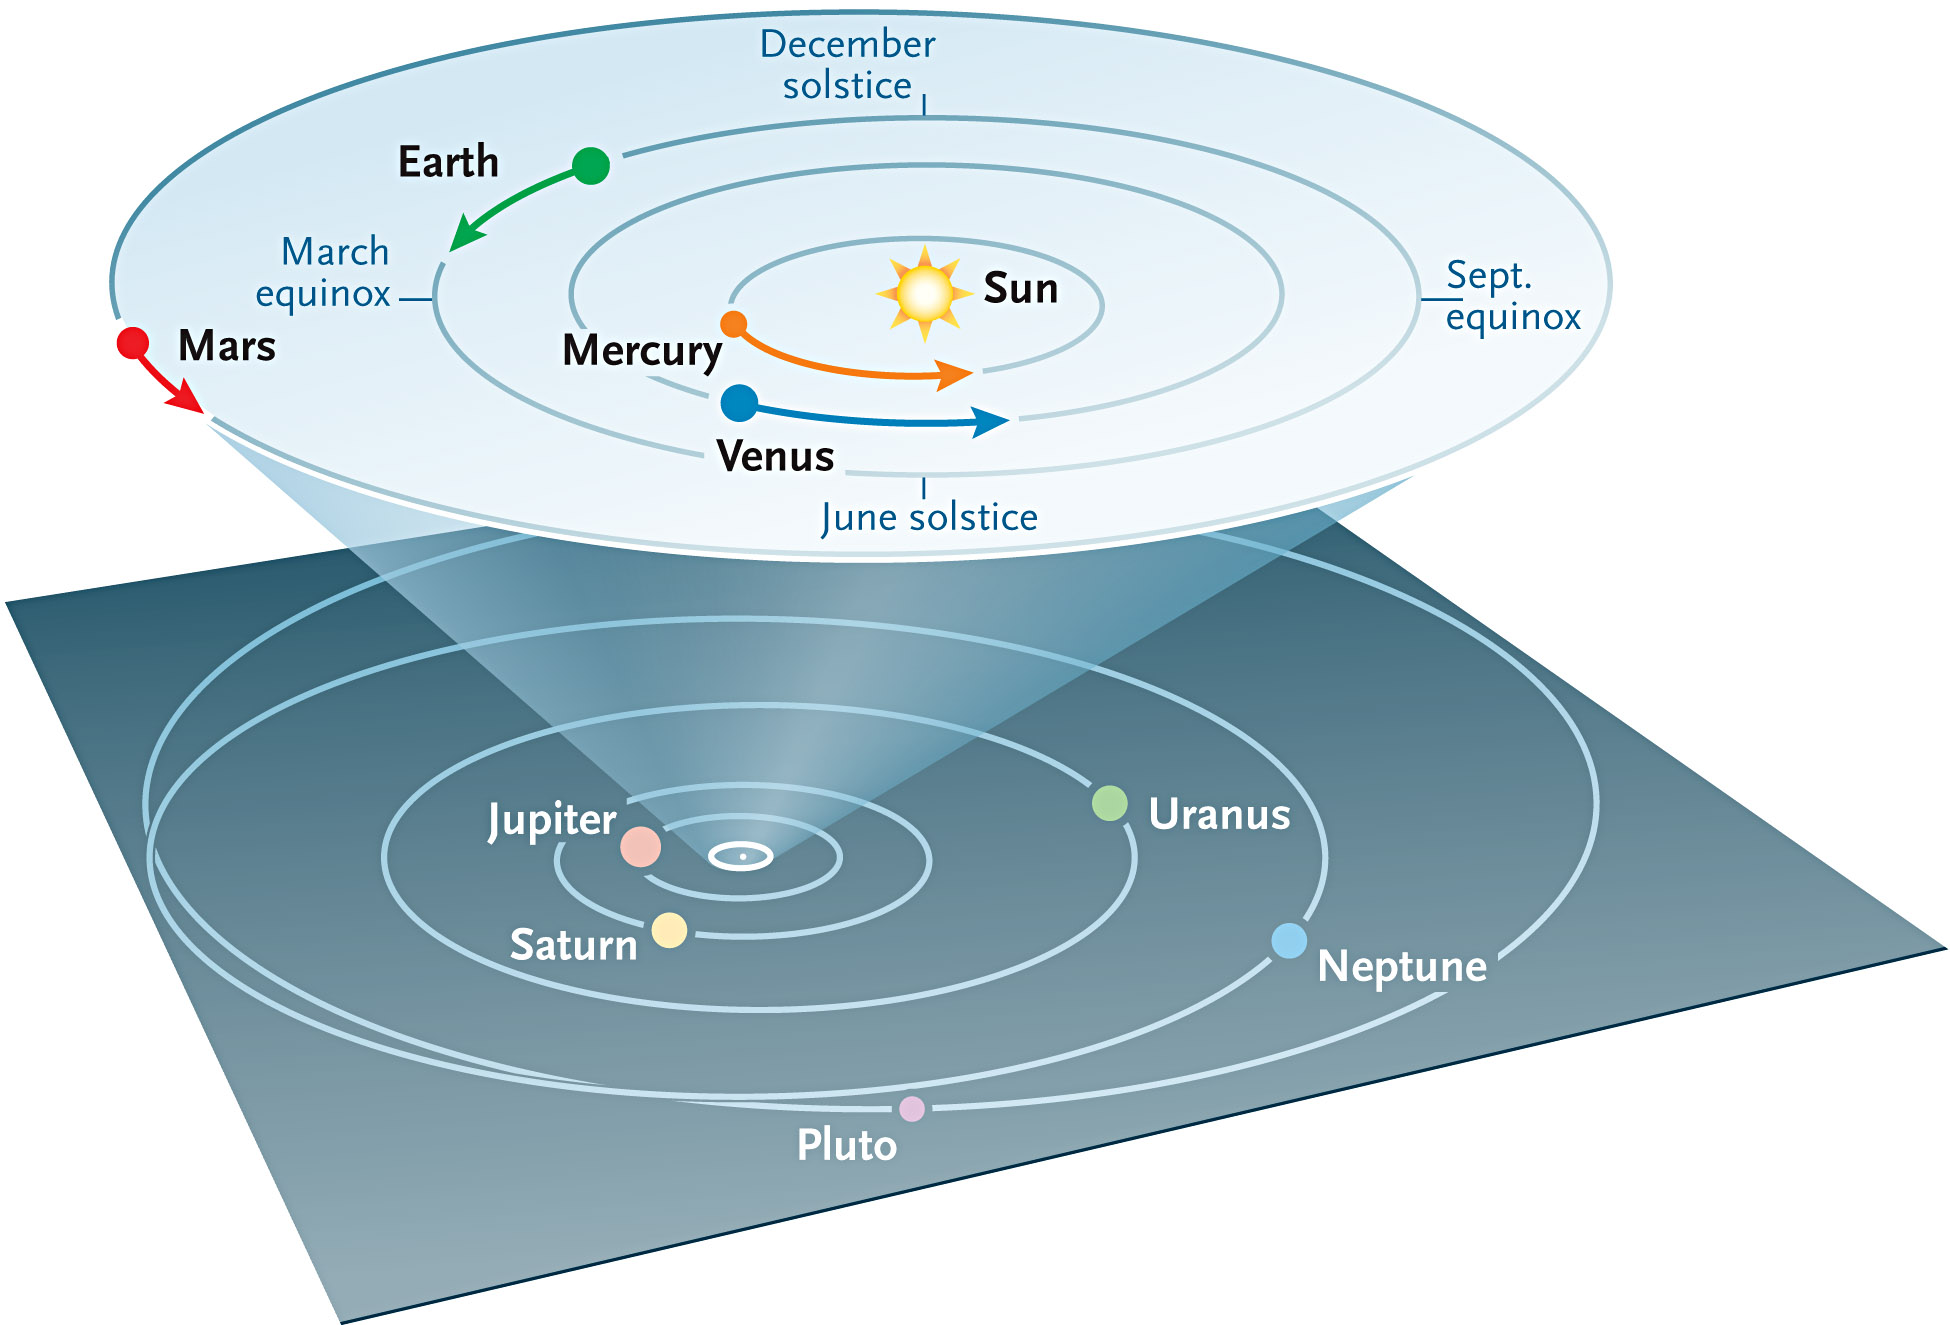 "Bird's-eye" view of the solar system